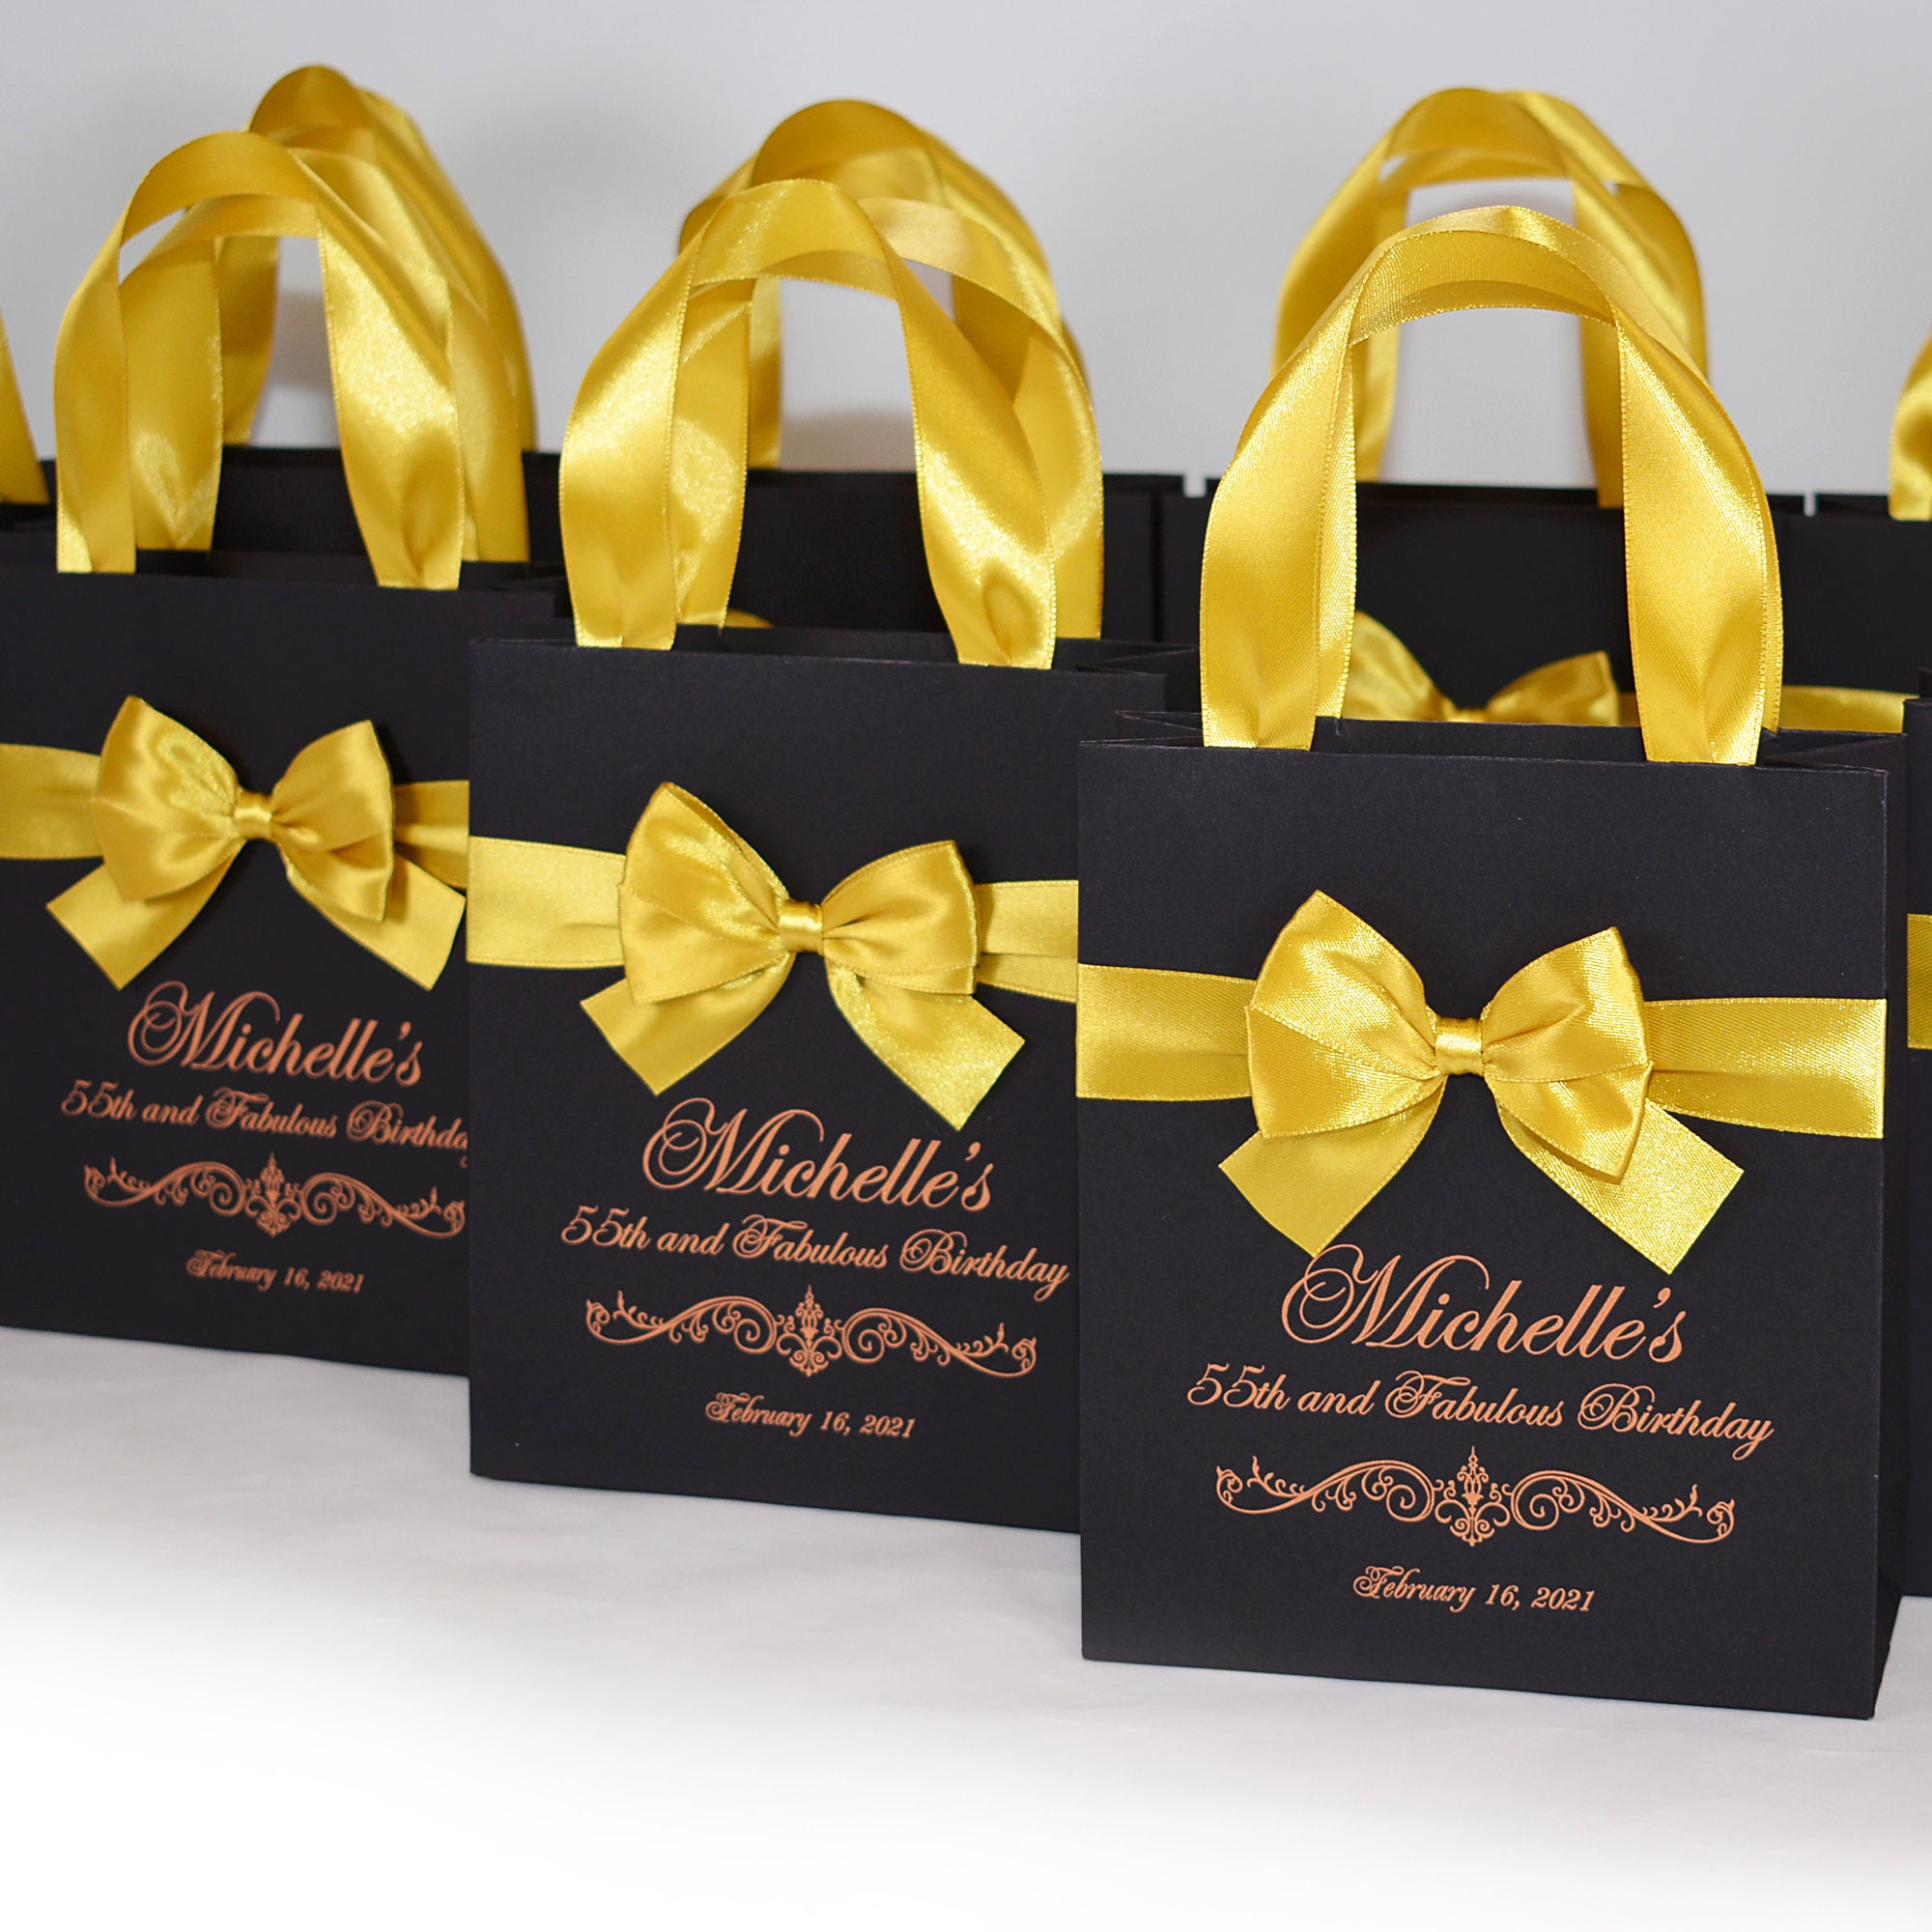 Personalized Birthday Party Favor Bags with satin ribbon bow and name,  Elegant Black & Gold 50th Anniversary gifts for guests - AliExpress